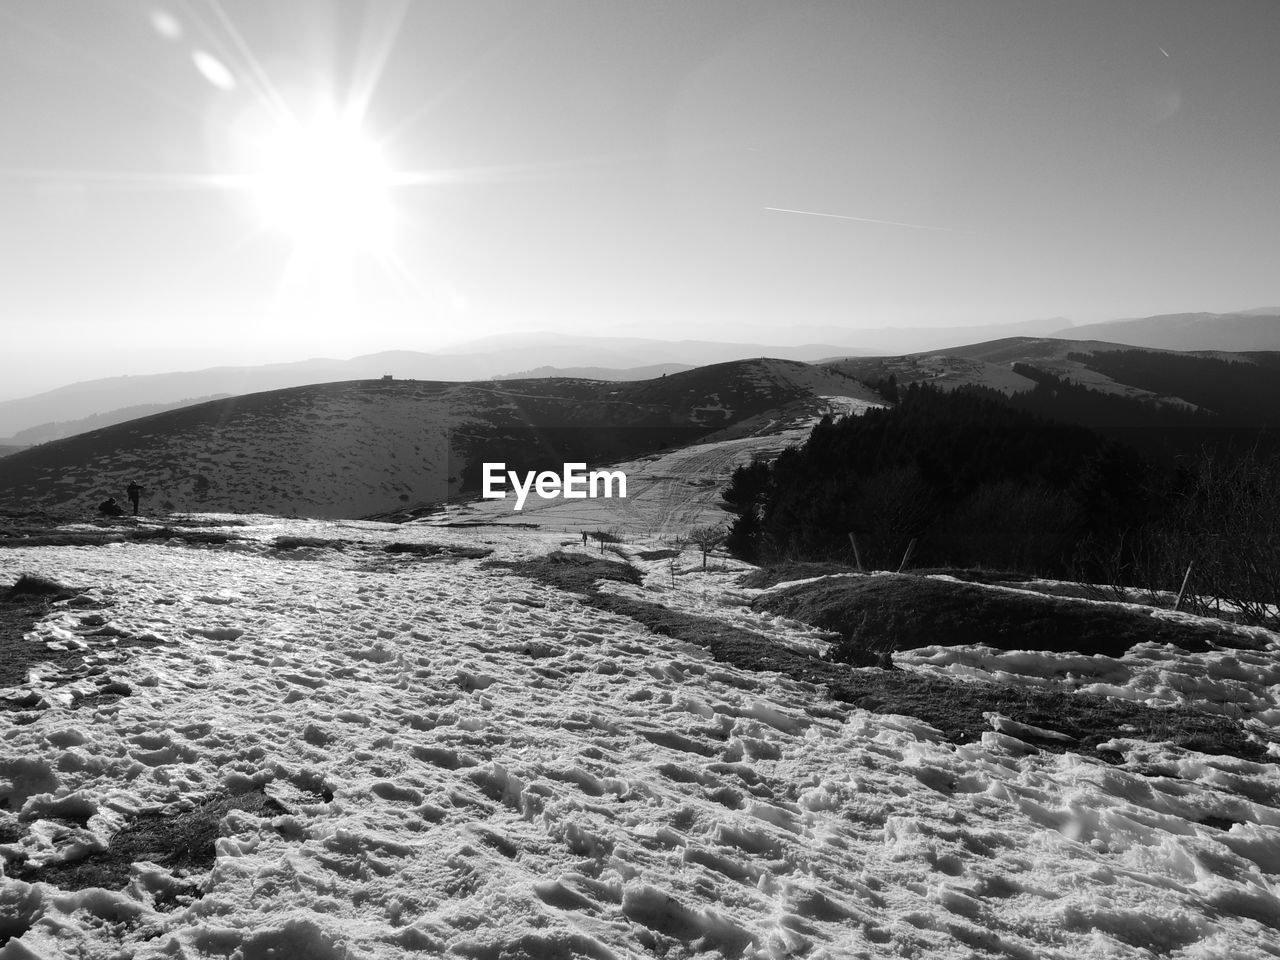 sky, black and white, environment, monochrome photography, monochrome, landscape, scenics - nature, nature, snow, sunlight, beauty in nature, mountain, land, sun, tranquility, lens flare, no people, sunbeam, winter, tranquil scene, cold temperature, white, day, travel, non-urban scene, outdoors, sea, mountain range, water, cloud, sunny, travel destinations